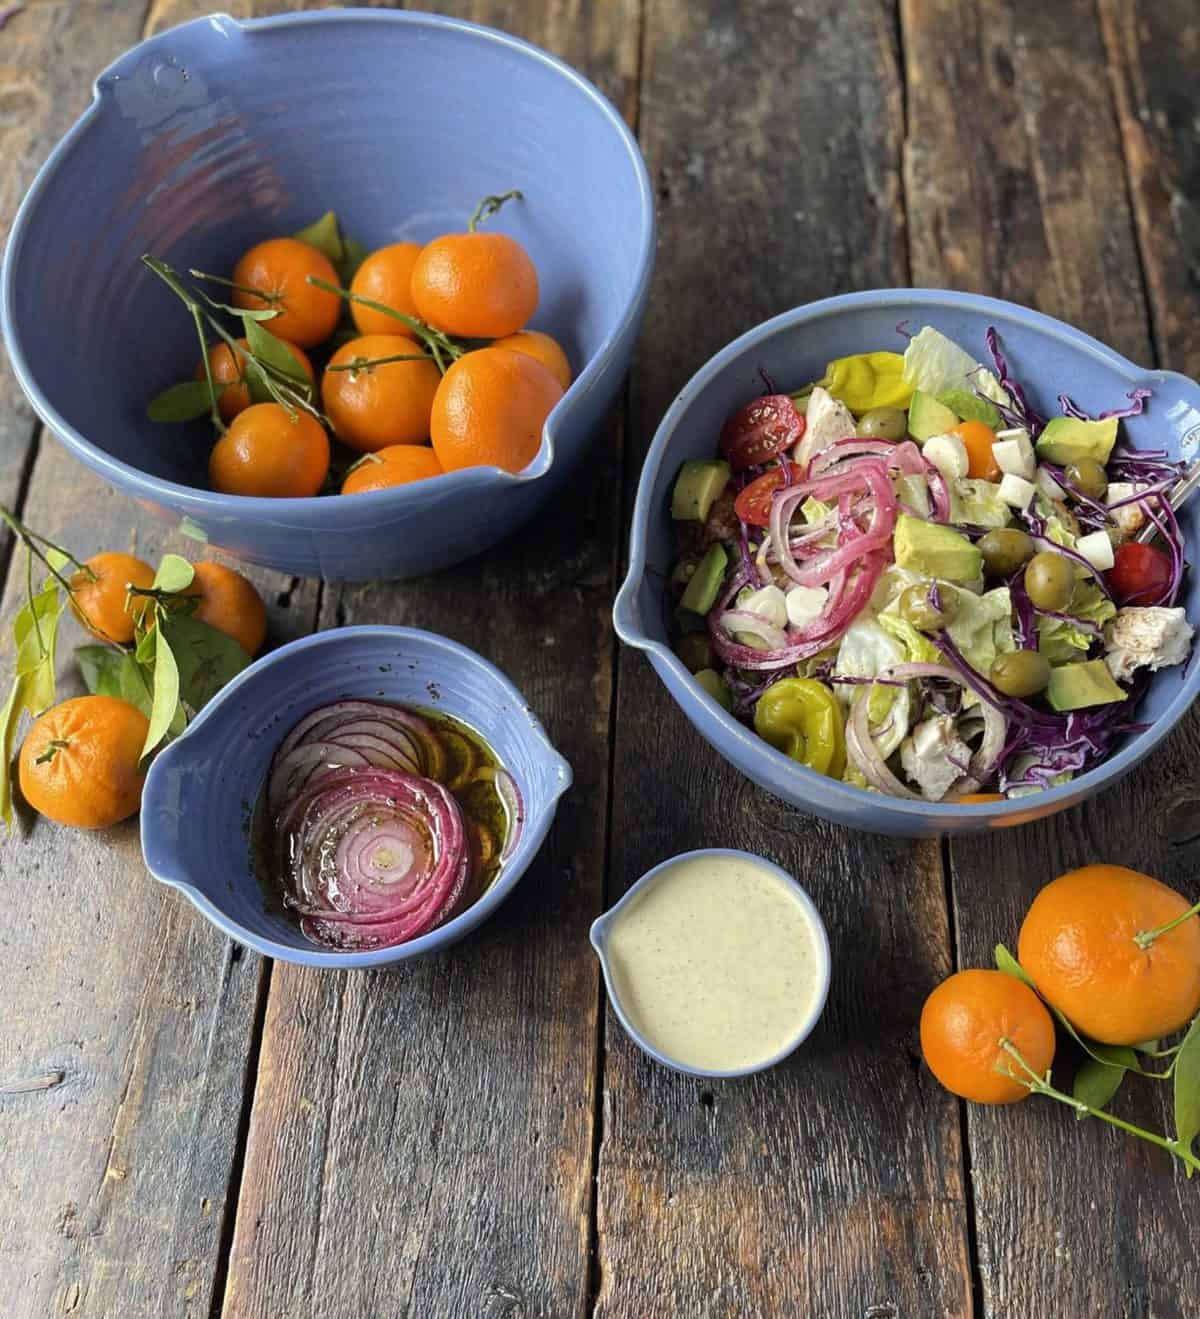 Creamy Clementine Dressing with California Prunes